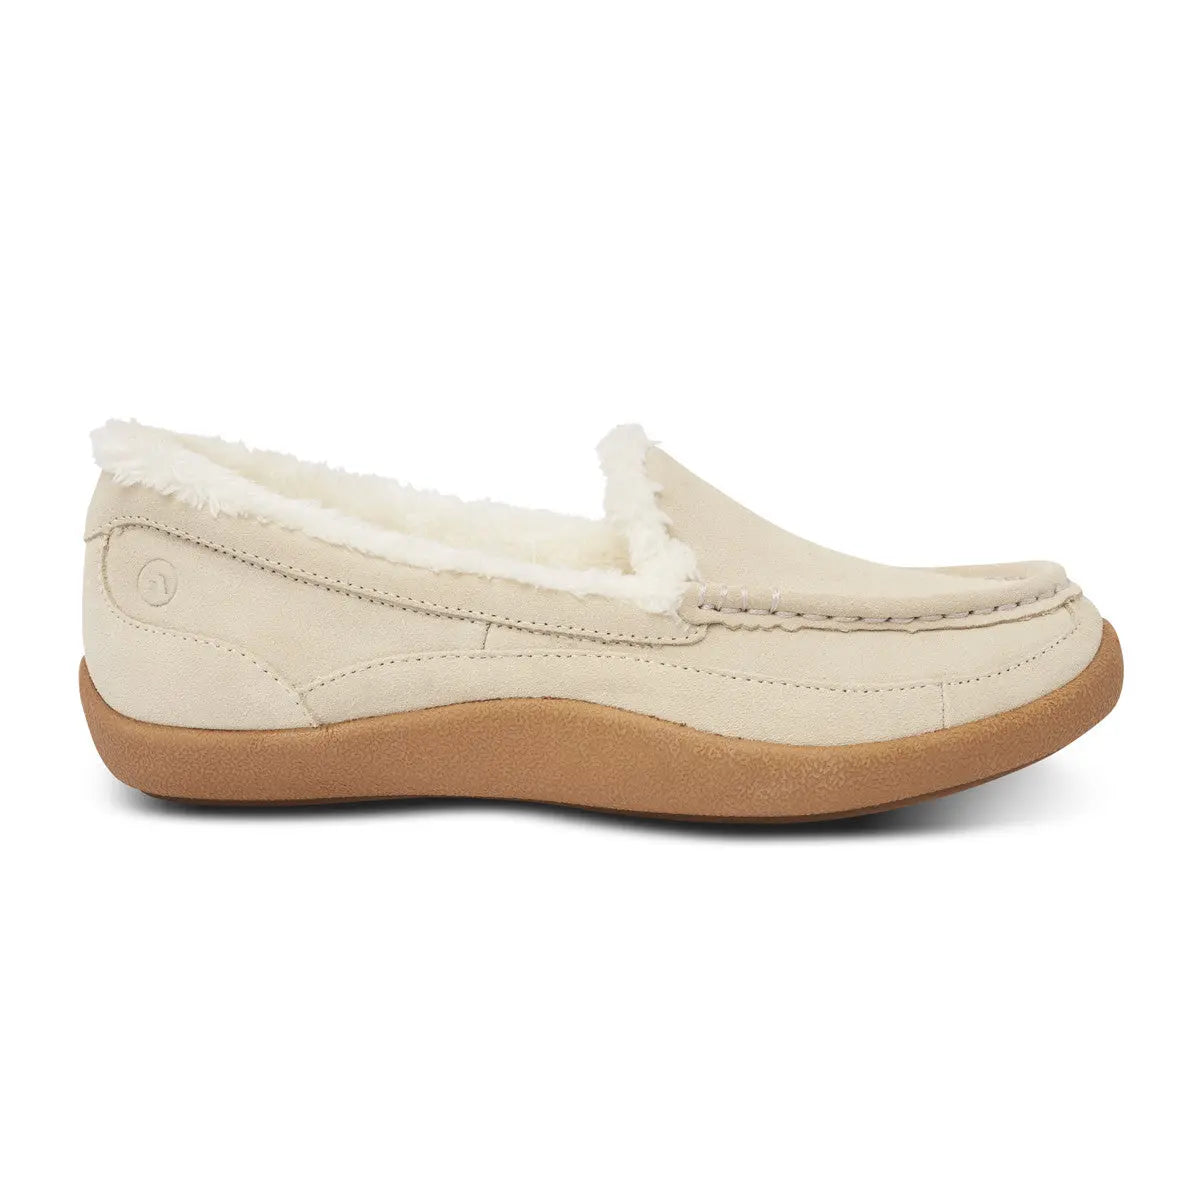 Medicated Women's Shoes: Comfort and Style Combined – Insignia PK